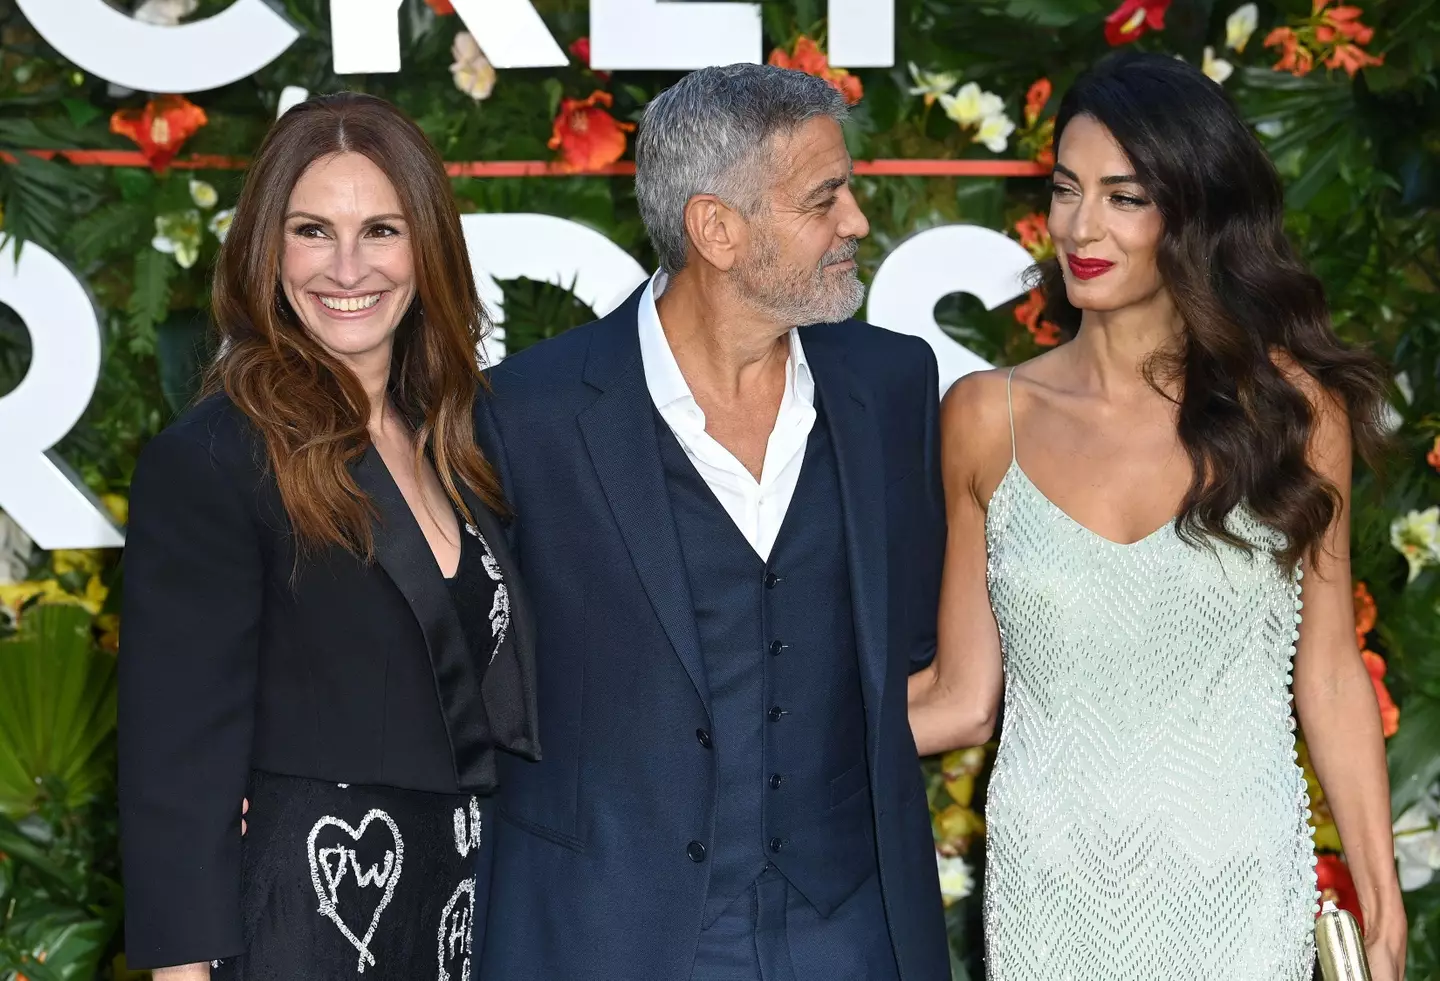 Julia with the Clooneys.